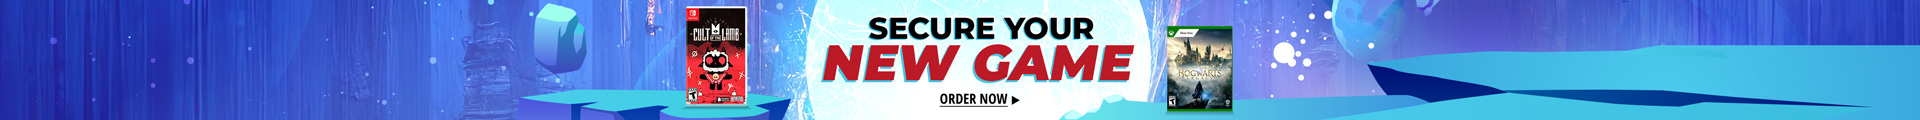 Secure Your New Game